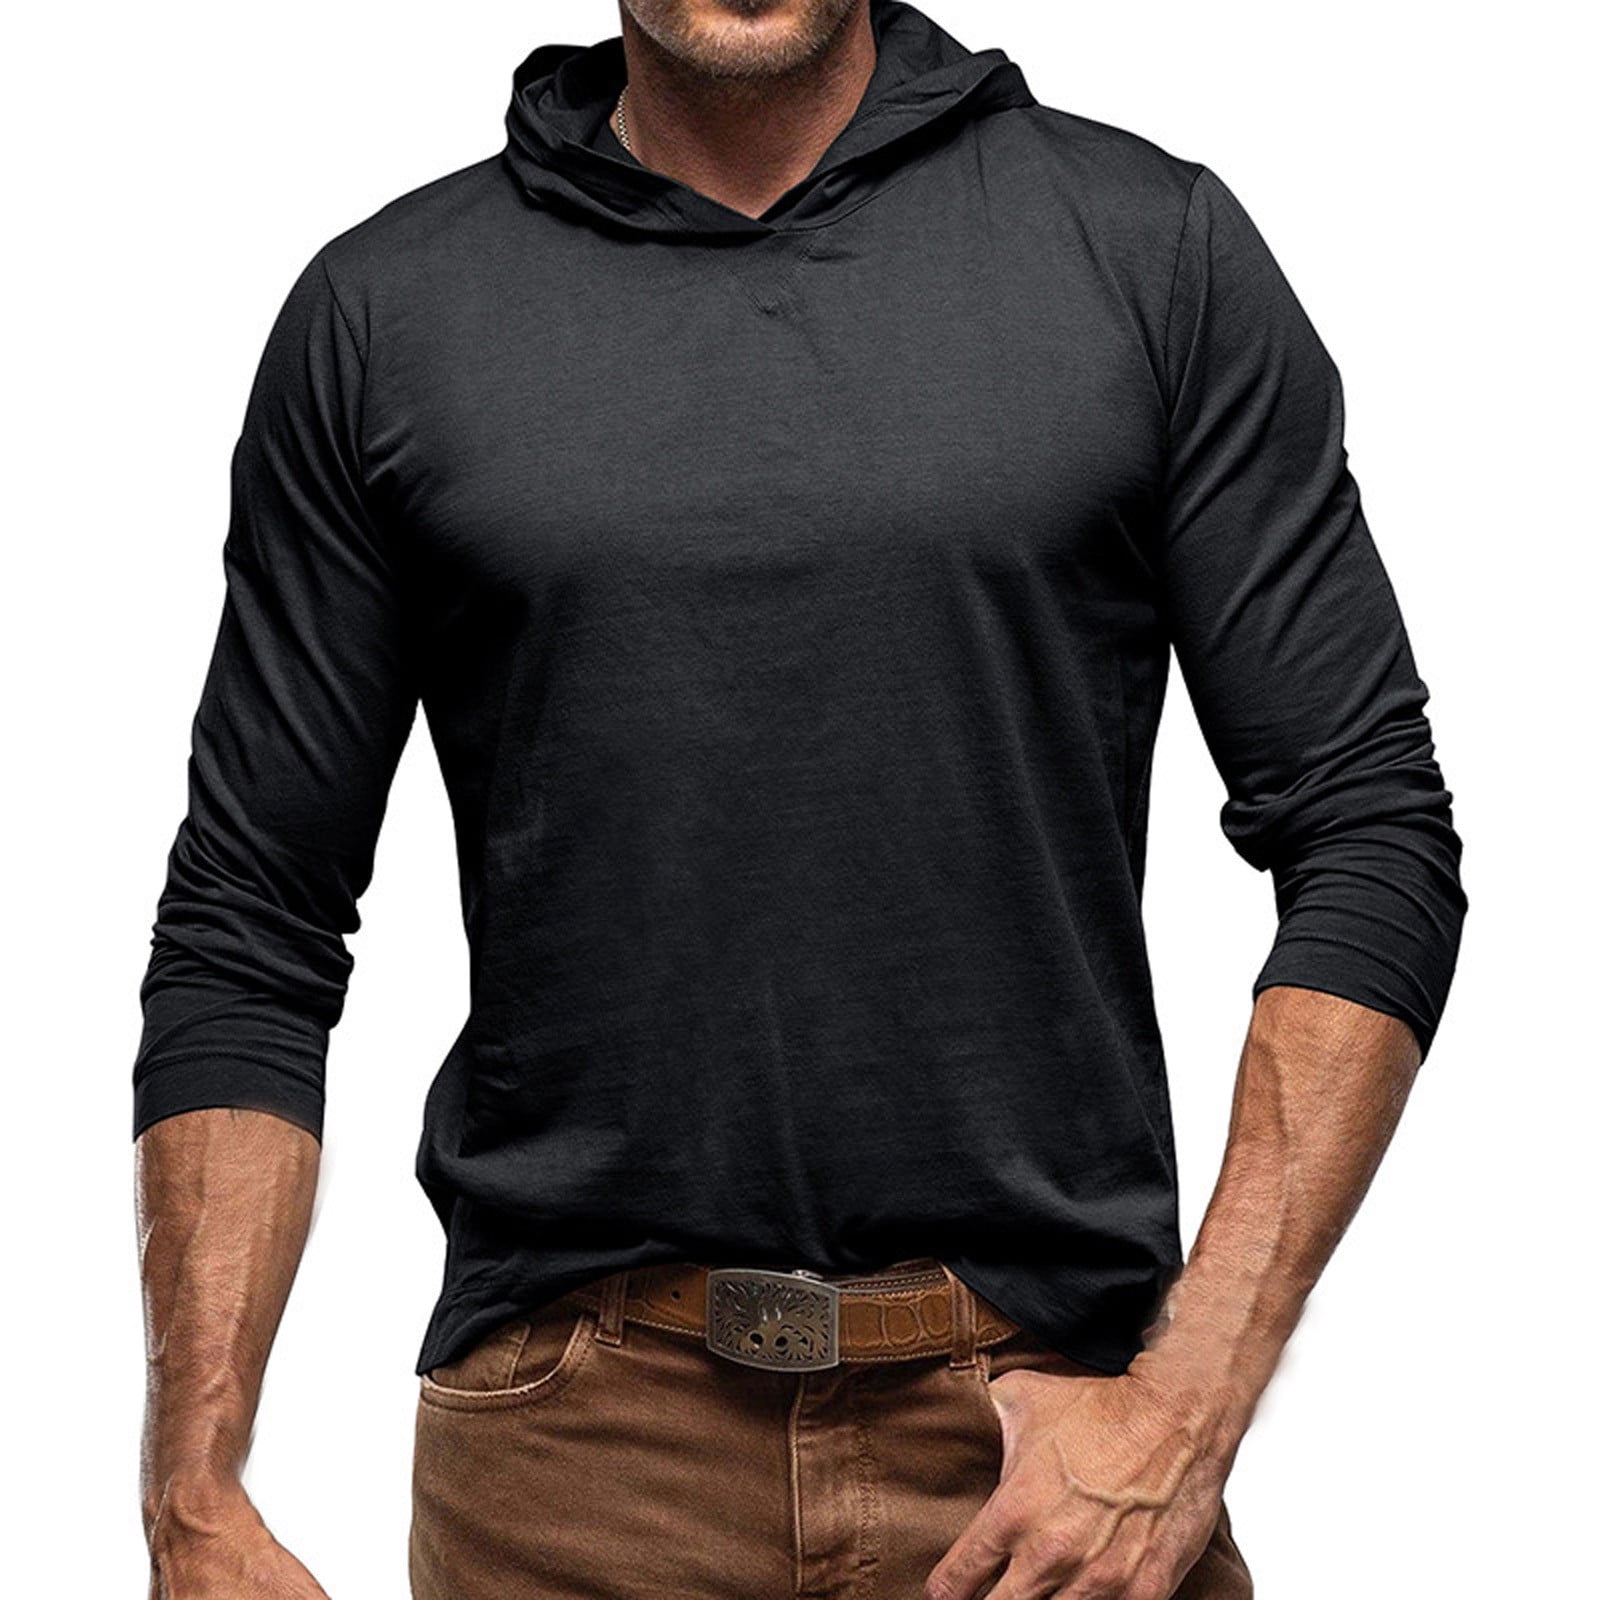 Awdenio Hoodies for Men Long Sleeve Shirts Solid Color Pullover T-shirt ...